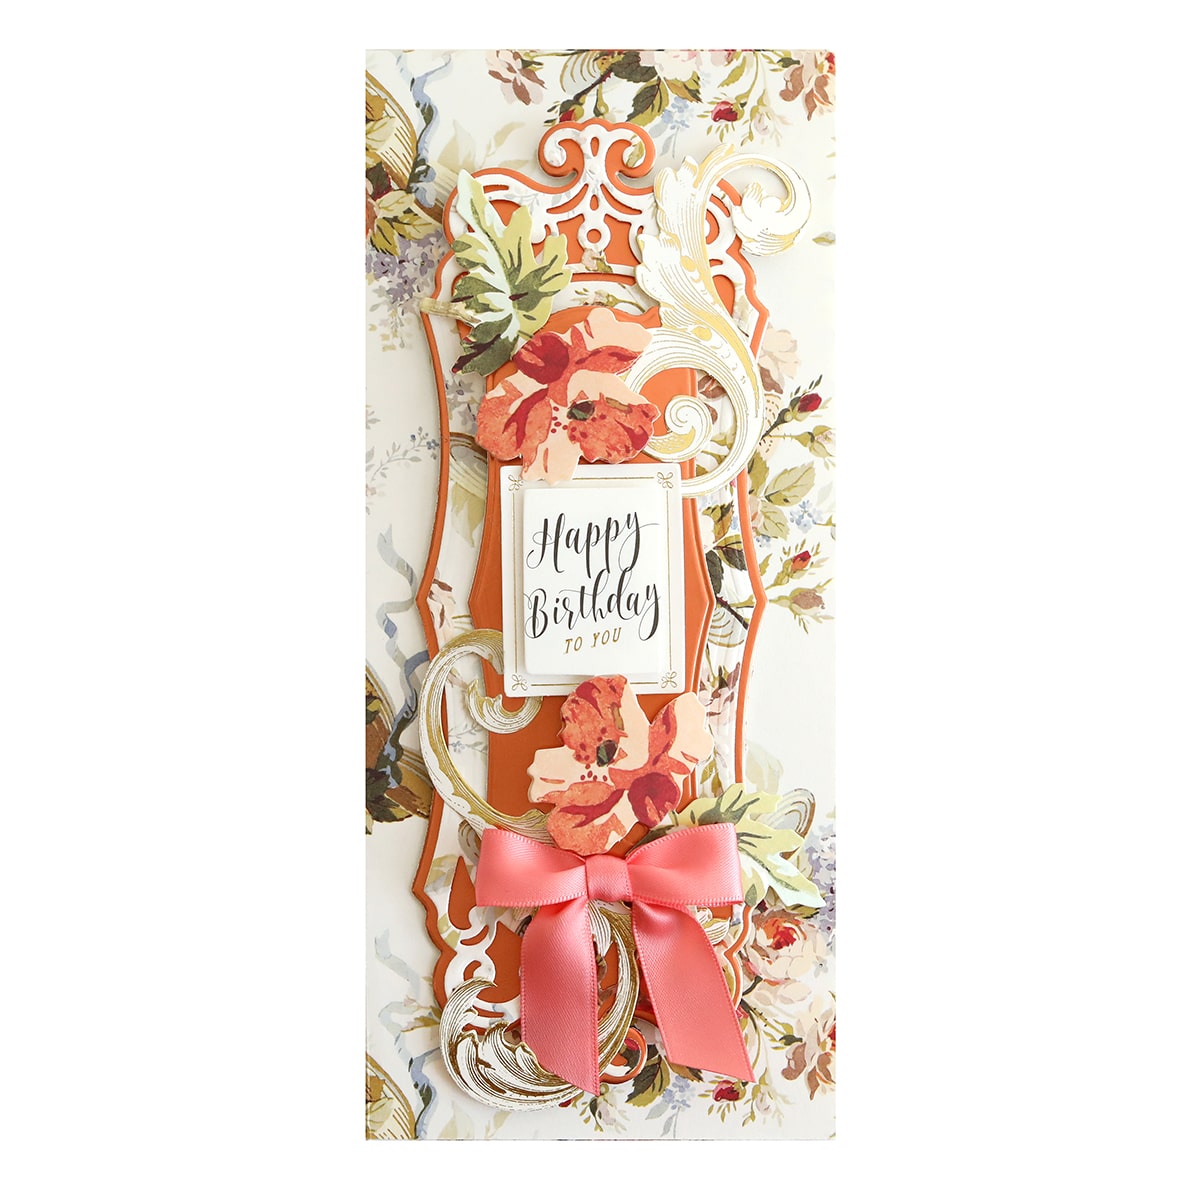 A happy birthday card with a bow and flowers.